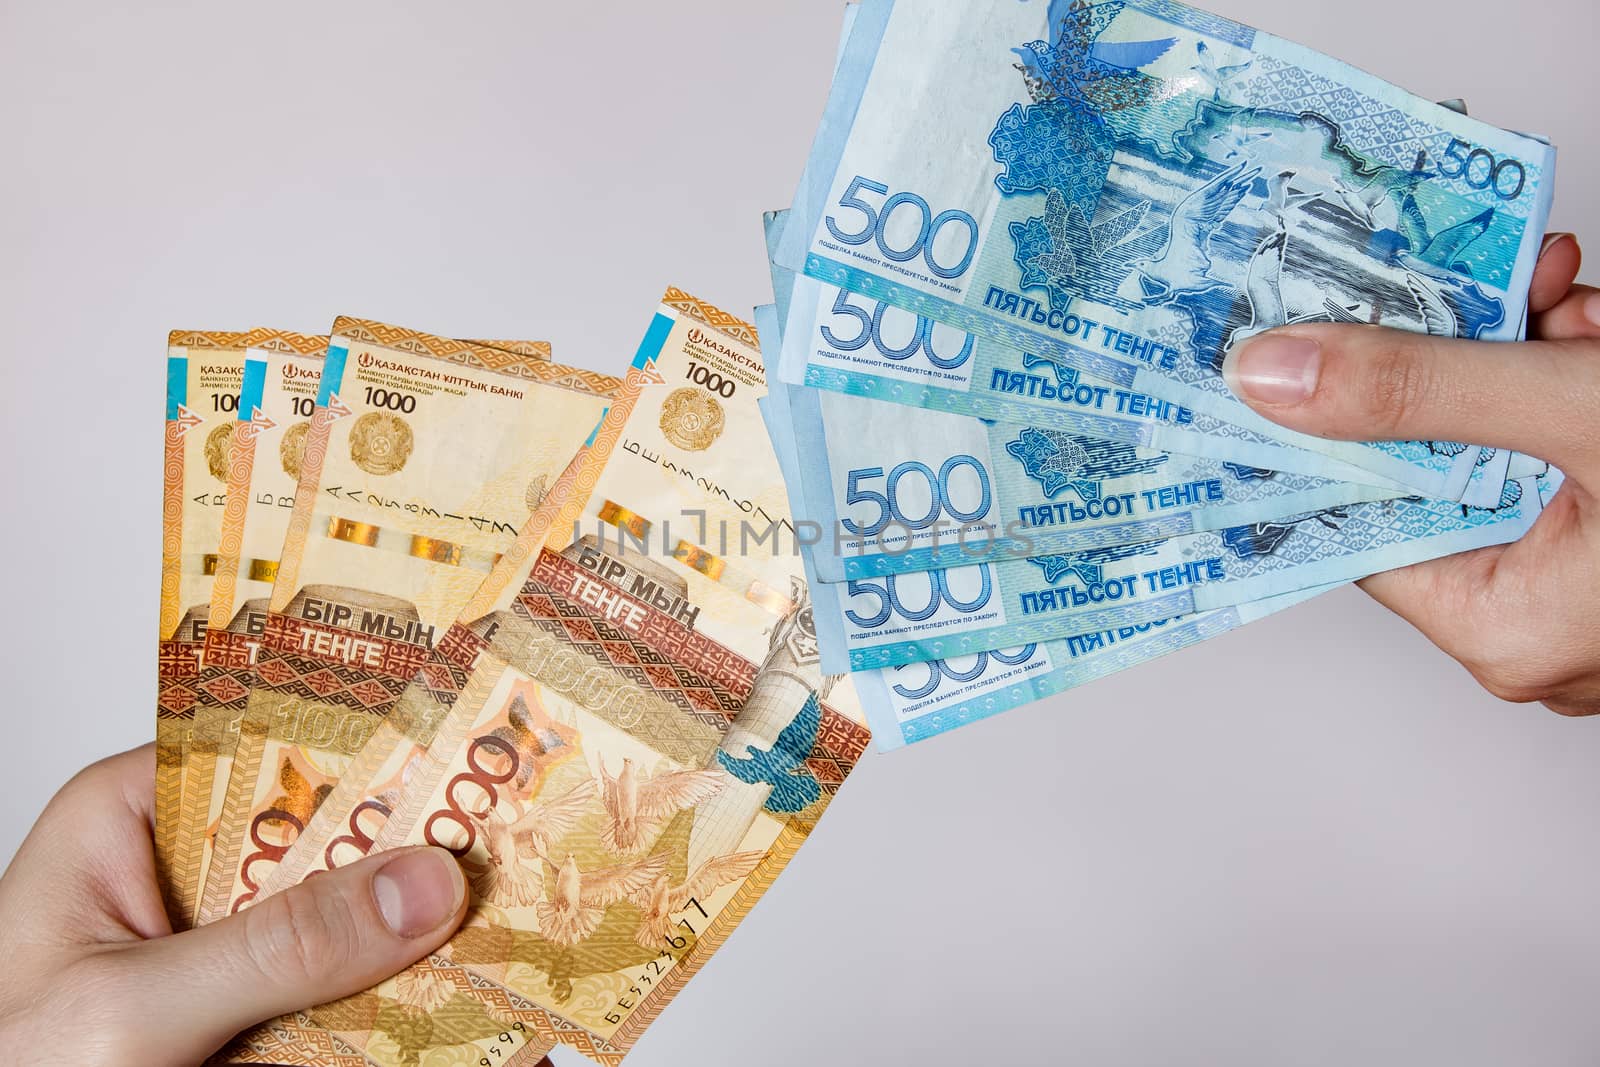 Paper banknotes tenge KZT people hold in their hands on white background. Tenge is the national currency of Kazakhstan.